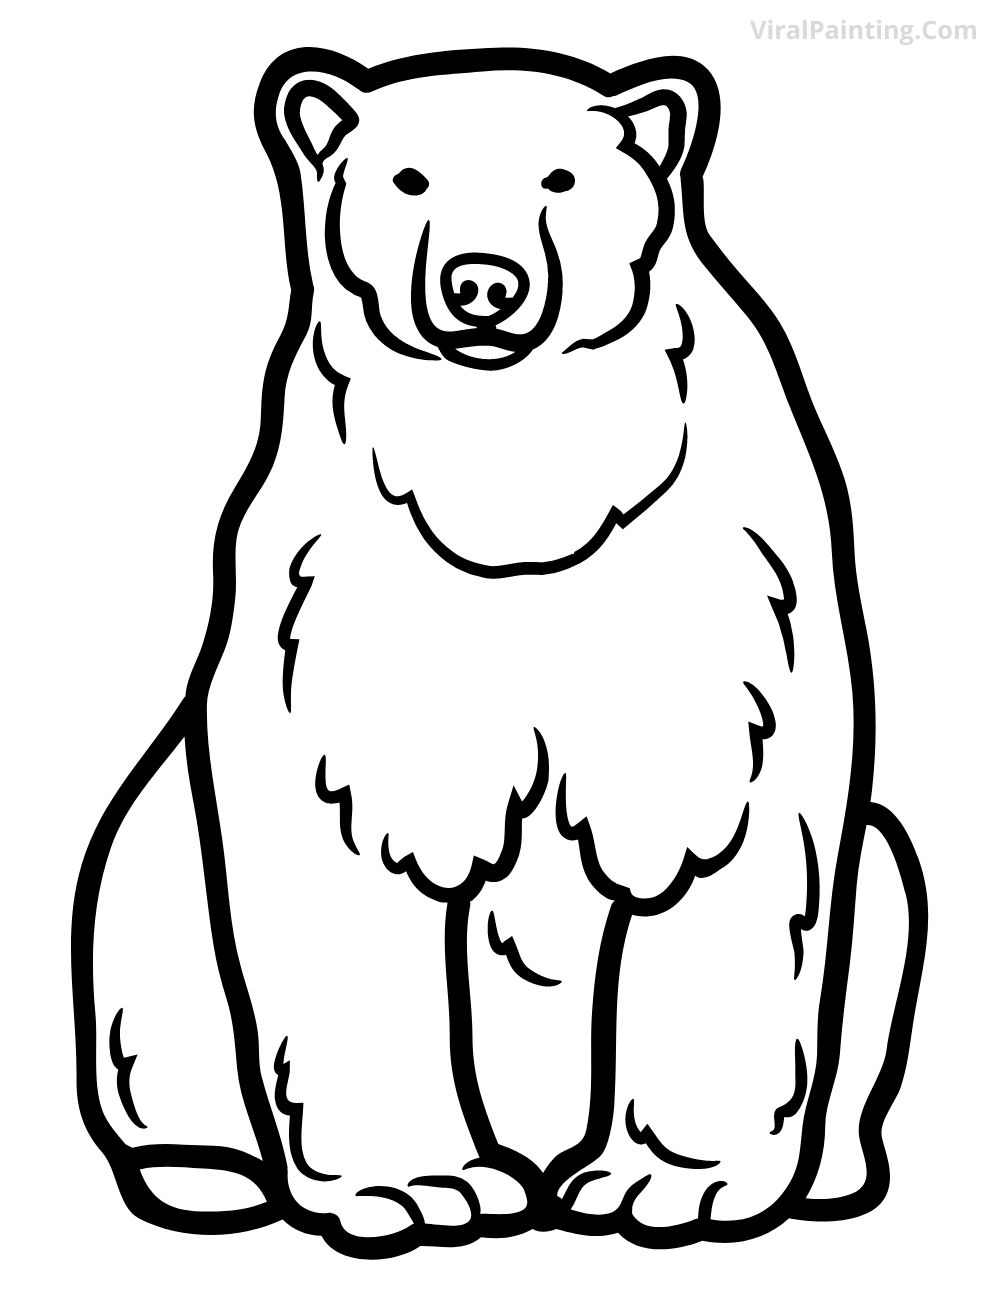 bear drawing ideas for professional artist (4)